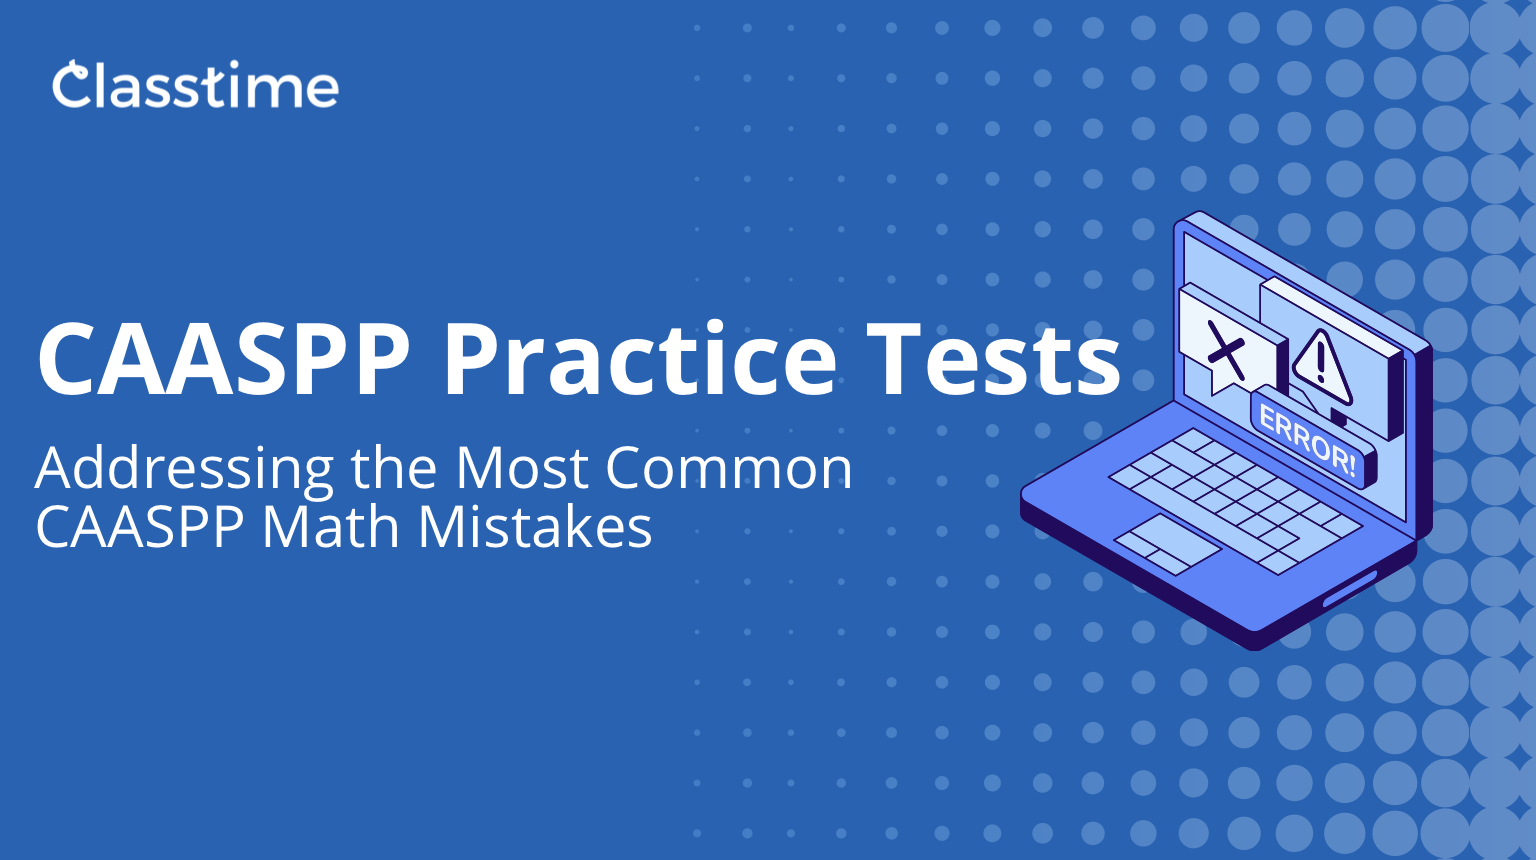 CAASPP Practice Tests: Addressing the Most Common CAASPP Math Mistakes